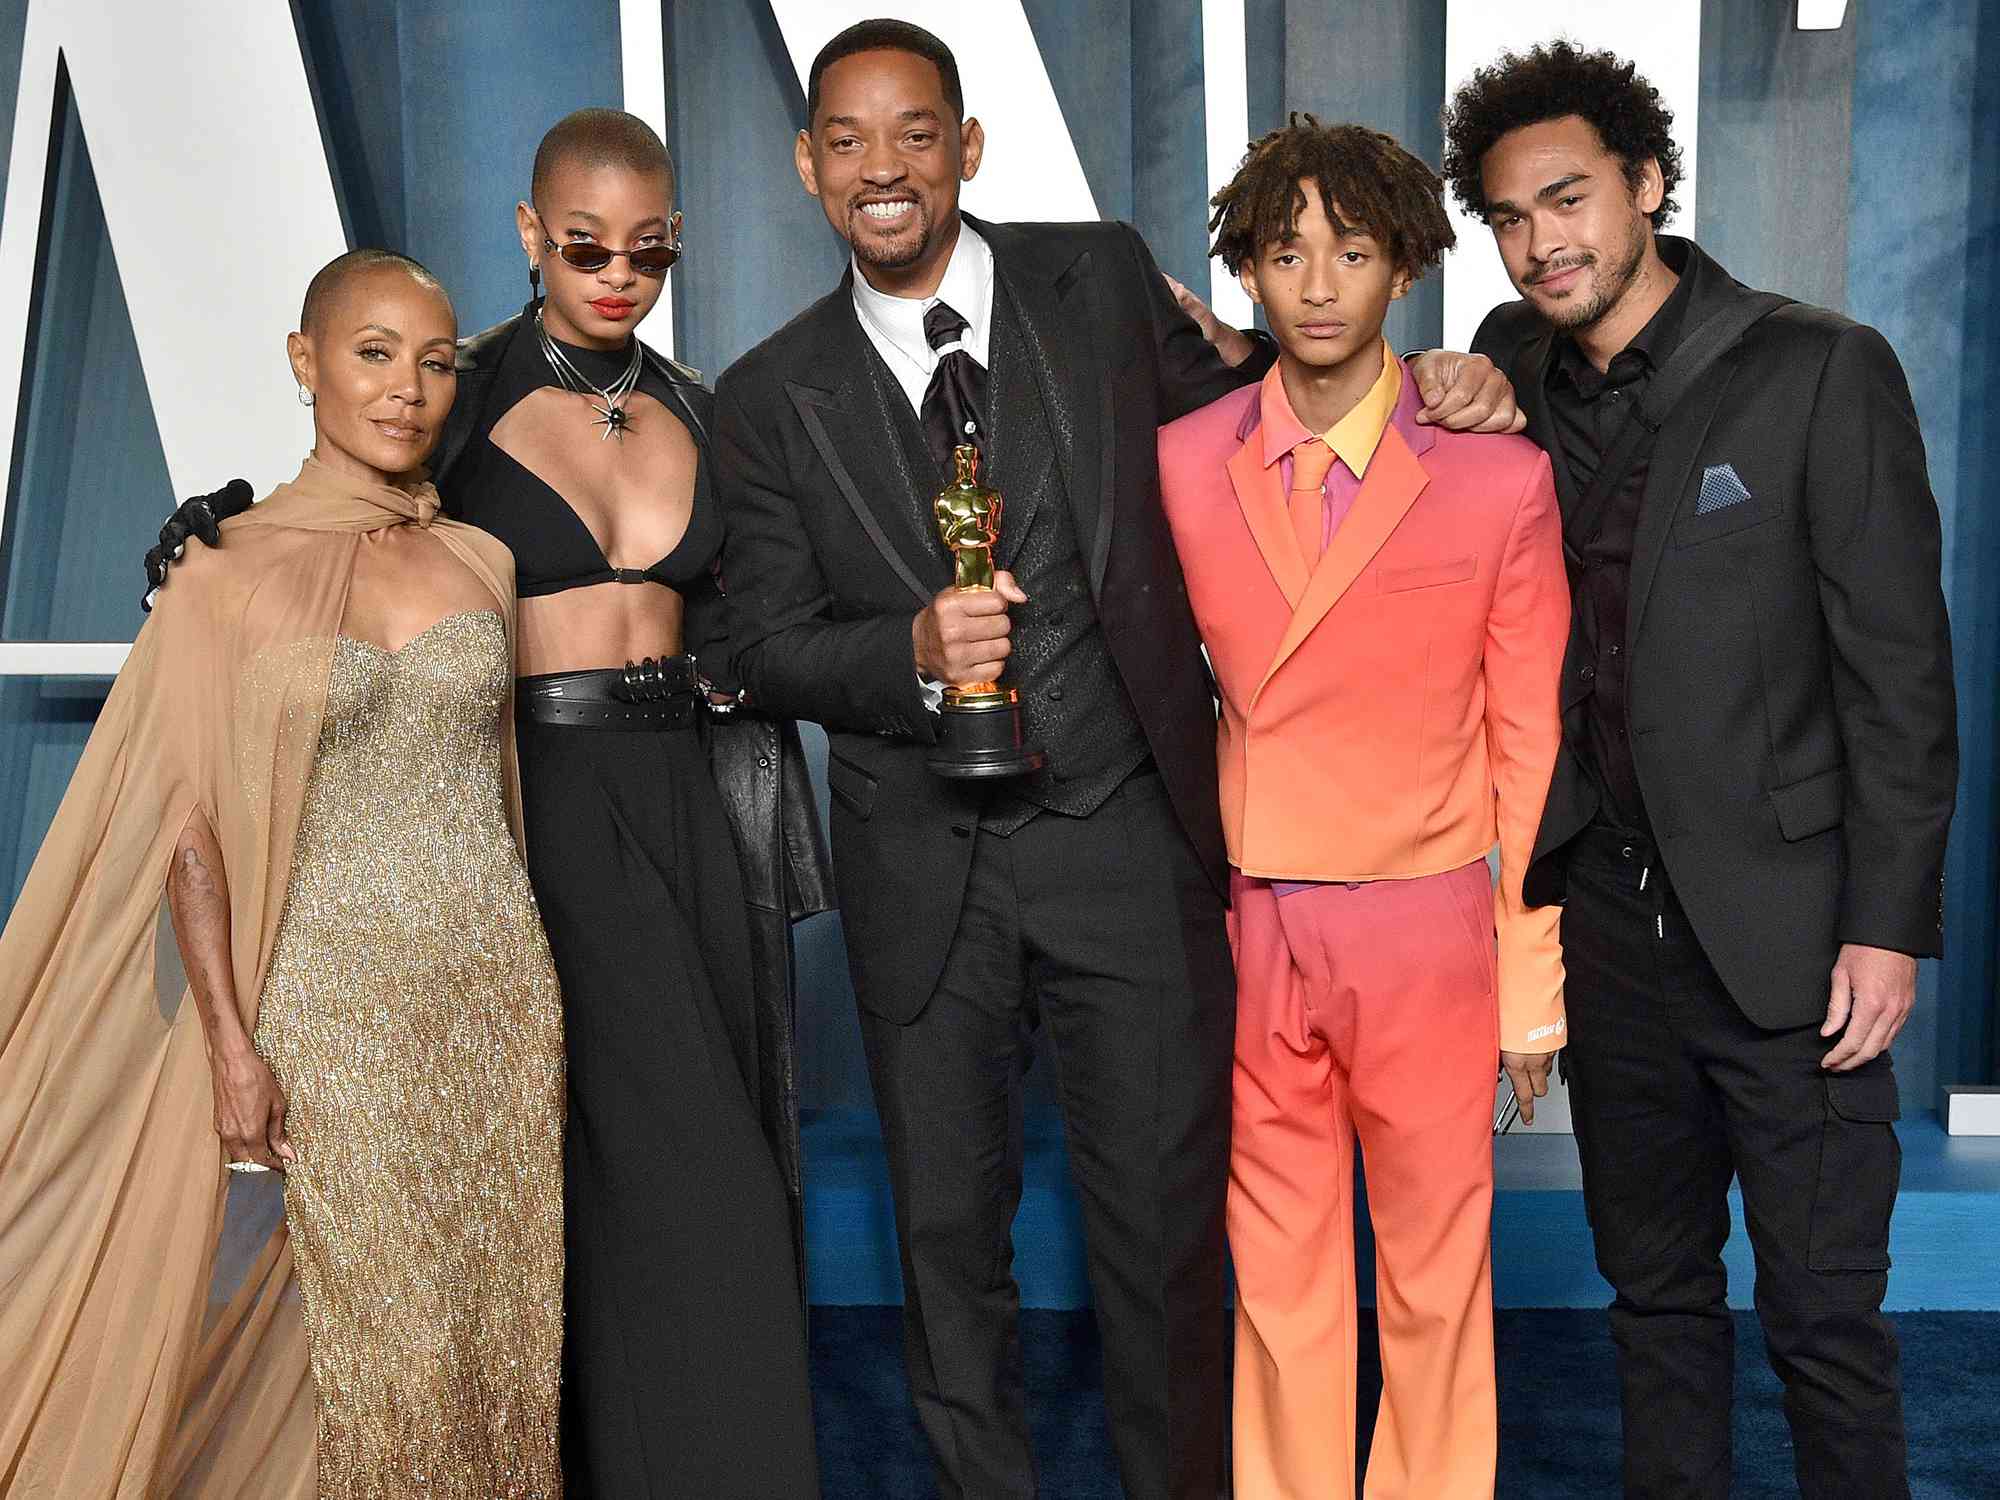 Jada Pinkett Smith, Willow Smith, Will Smith, Jaden Smith and Trey Smith attend the 2022 Vanity Fair Oscar Party on March 27, 2022 in Beverly Hills, California. 